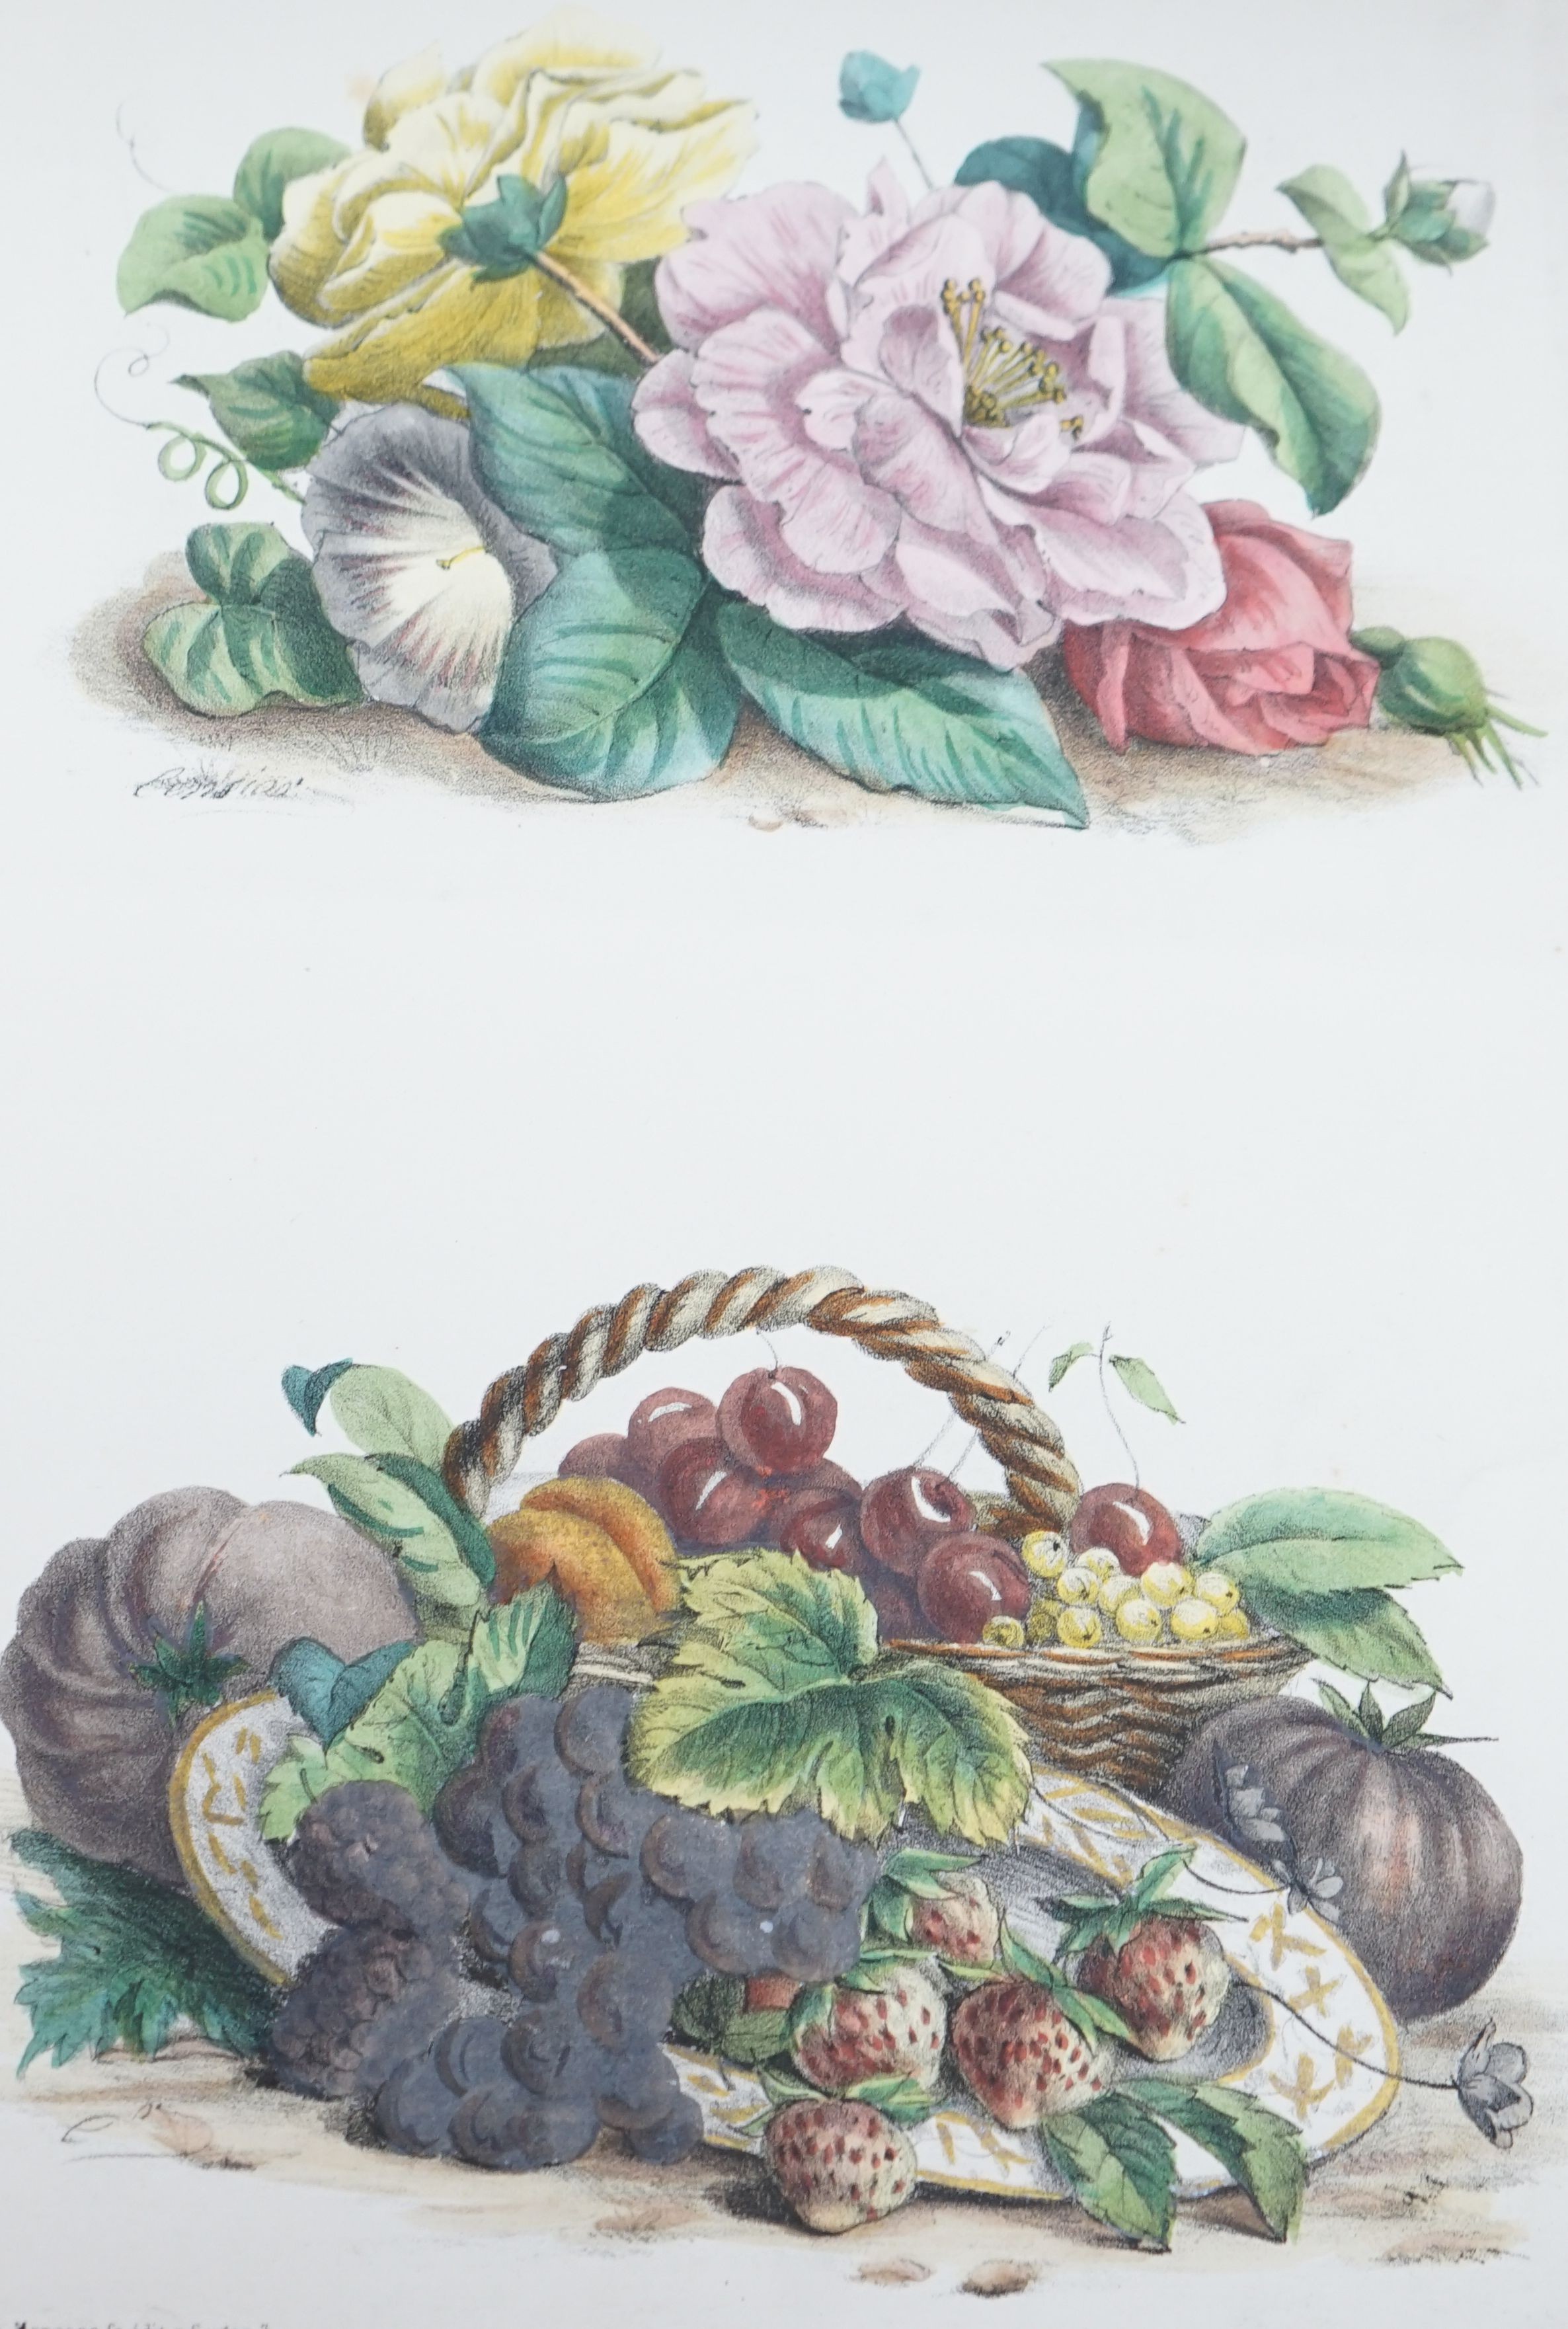 A folio of paintings and prints